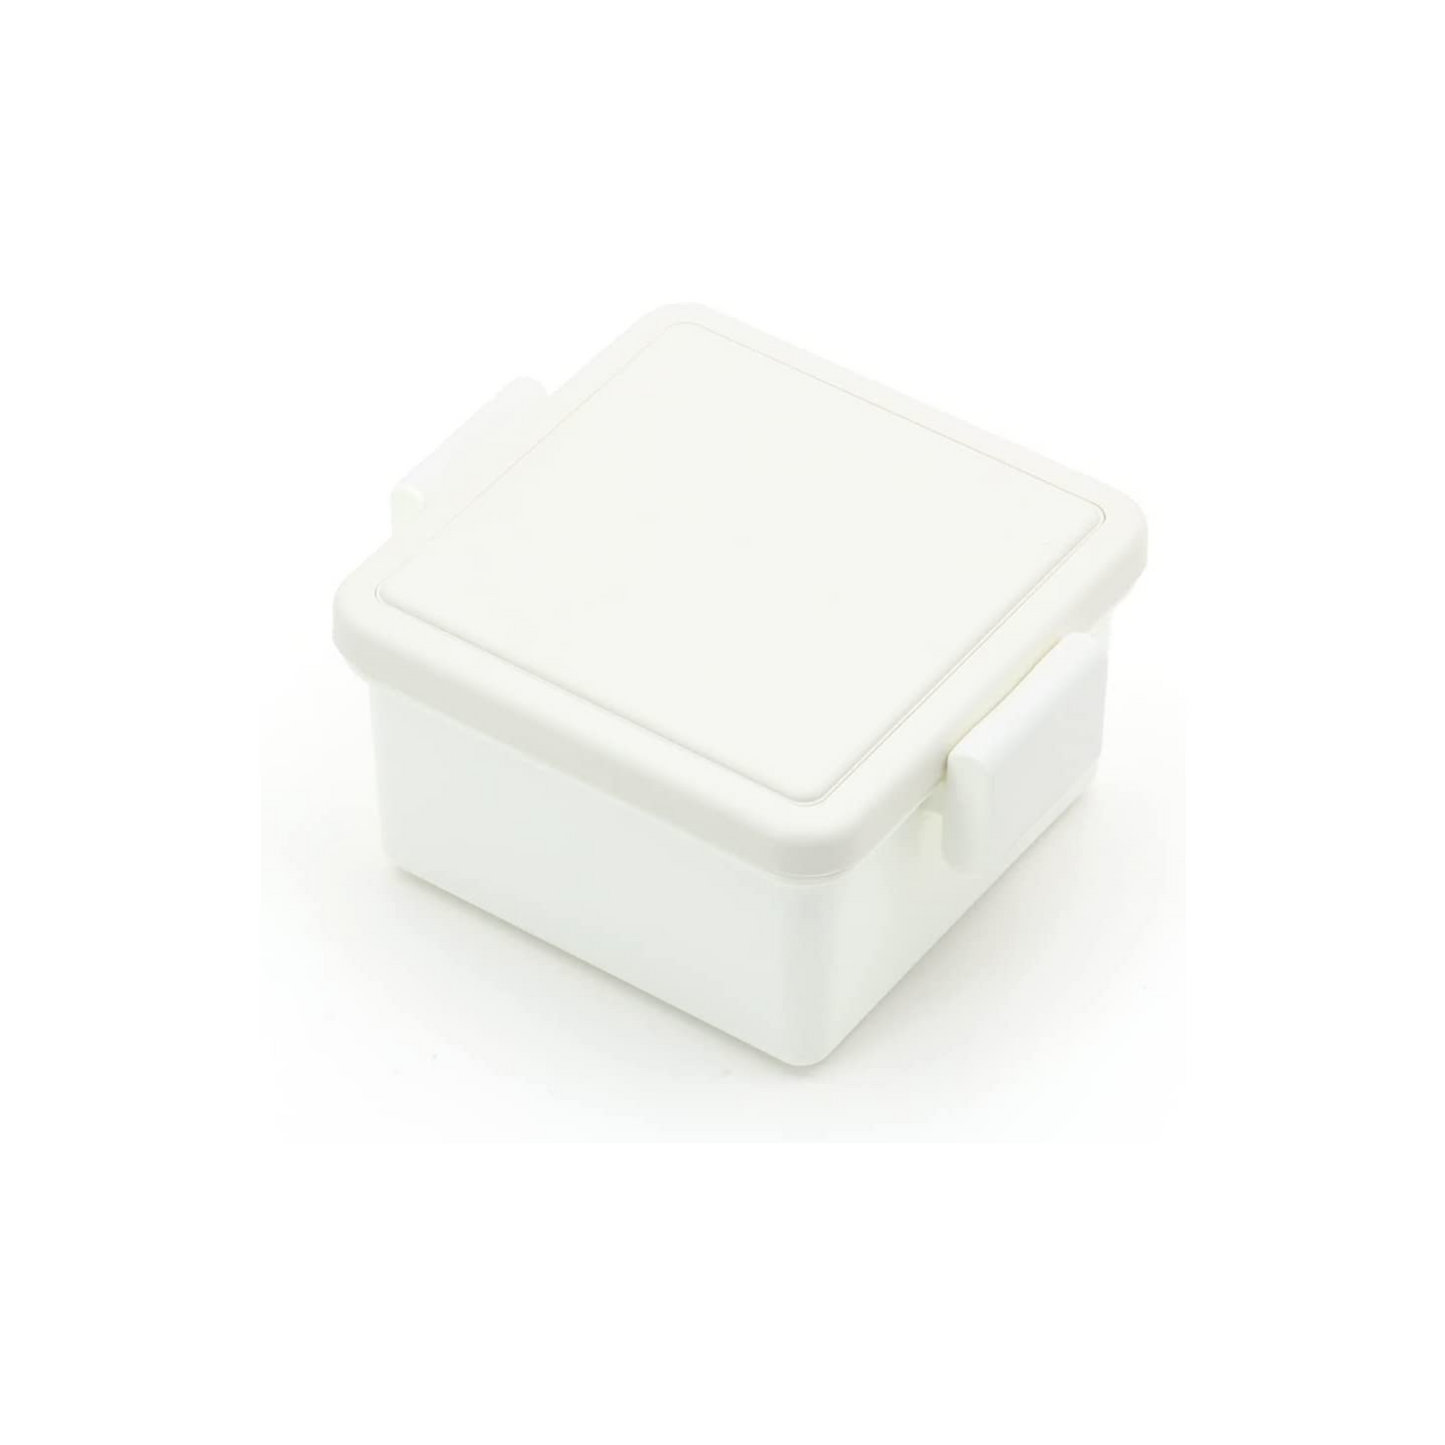  Milk Container For Lunch Box